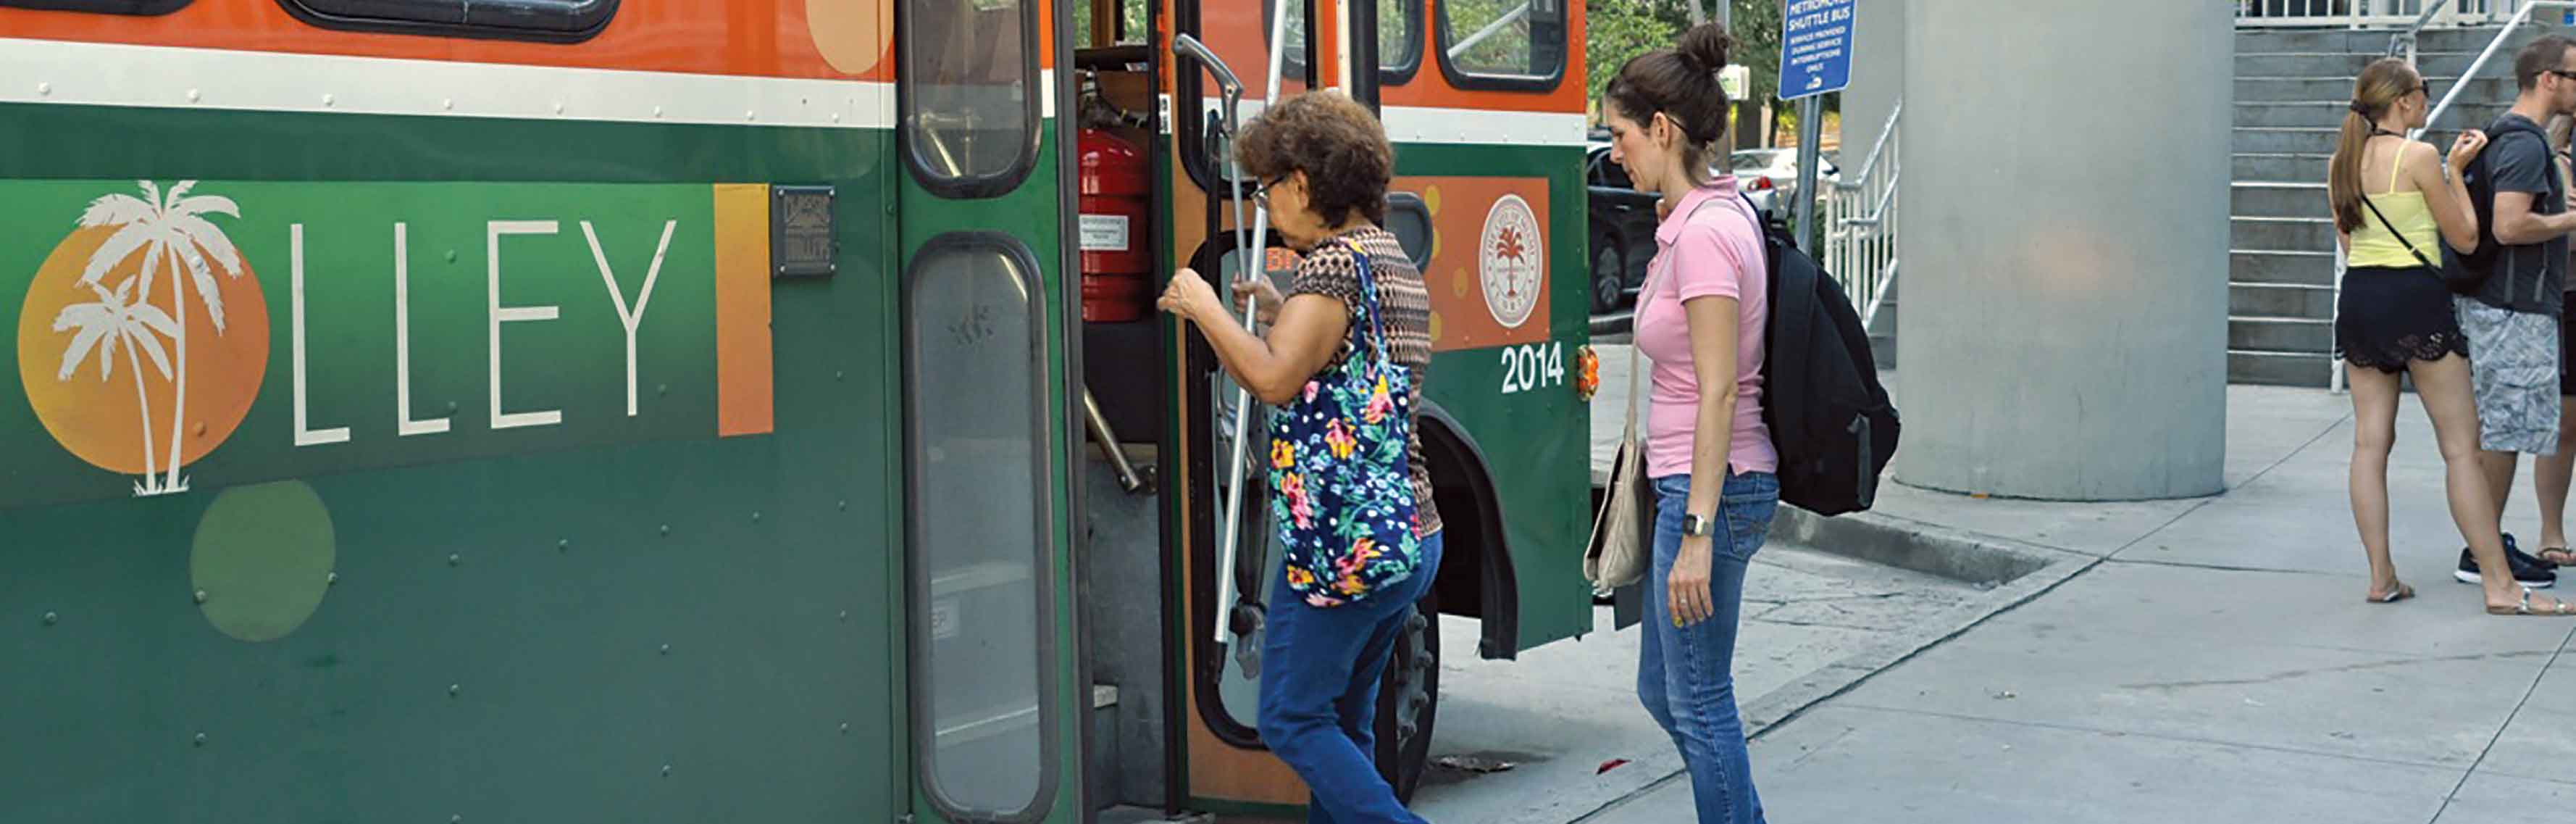 Miami’s trolley system to improve GPS tracking